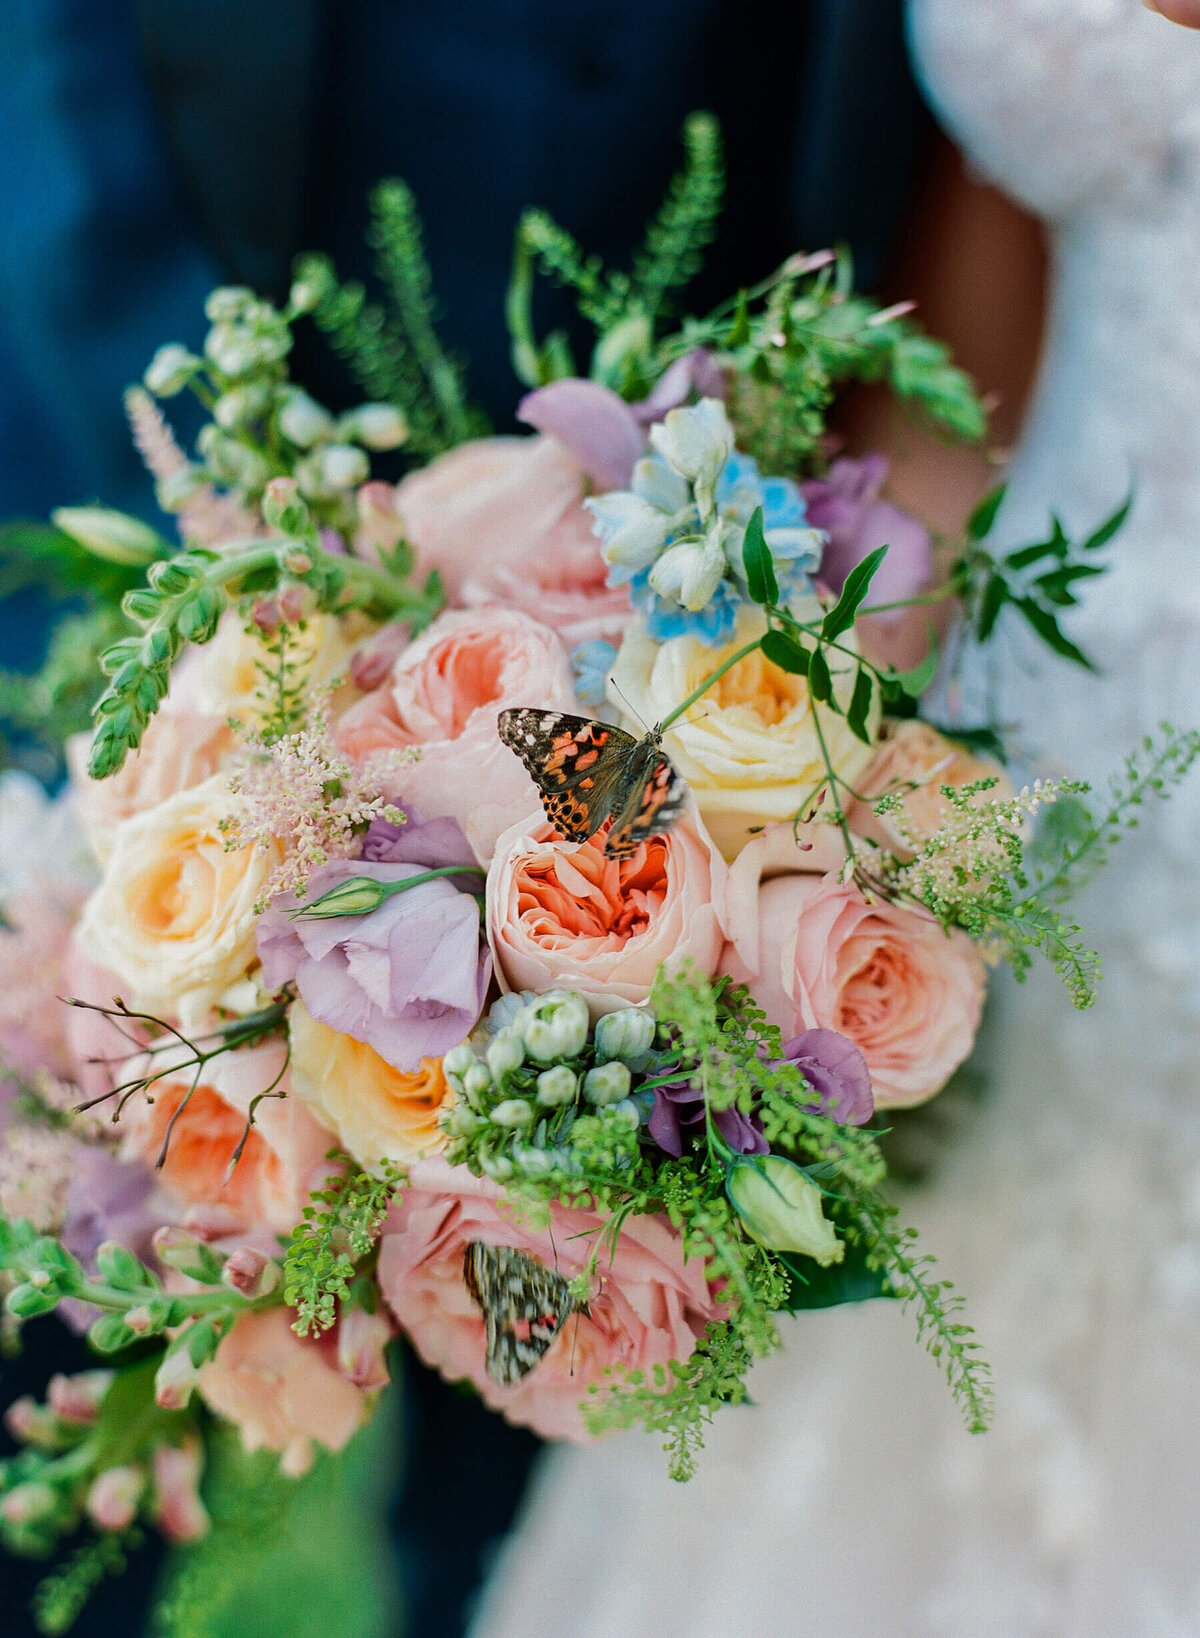 Peach, purple, green, yellow bridal bouquet with roses, berries and live butterflies.